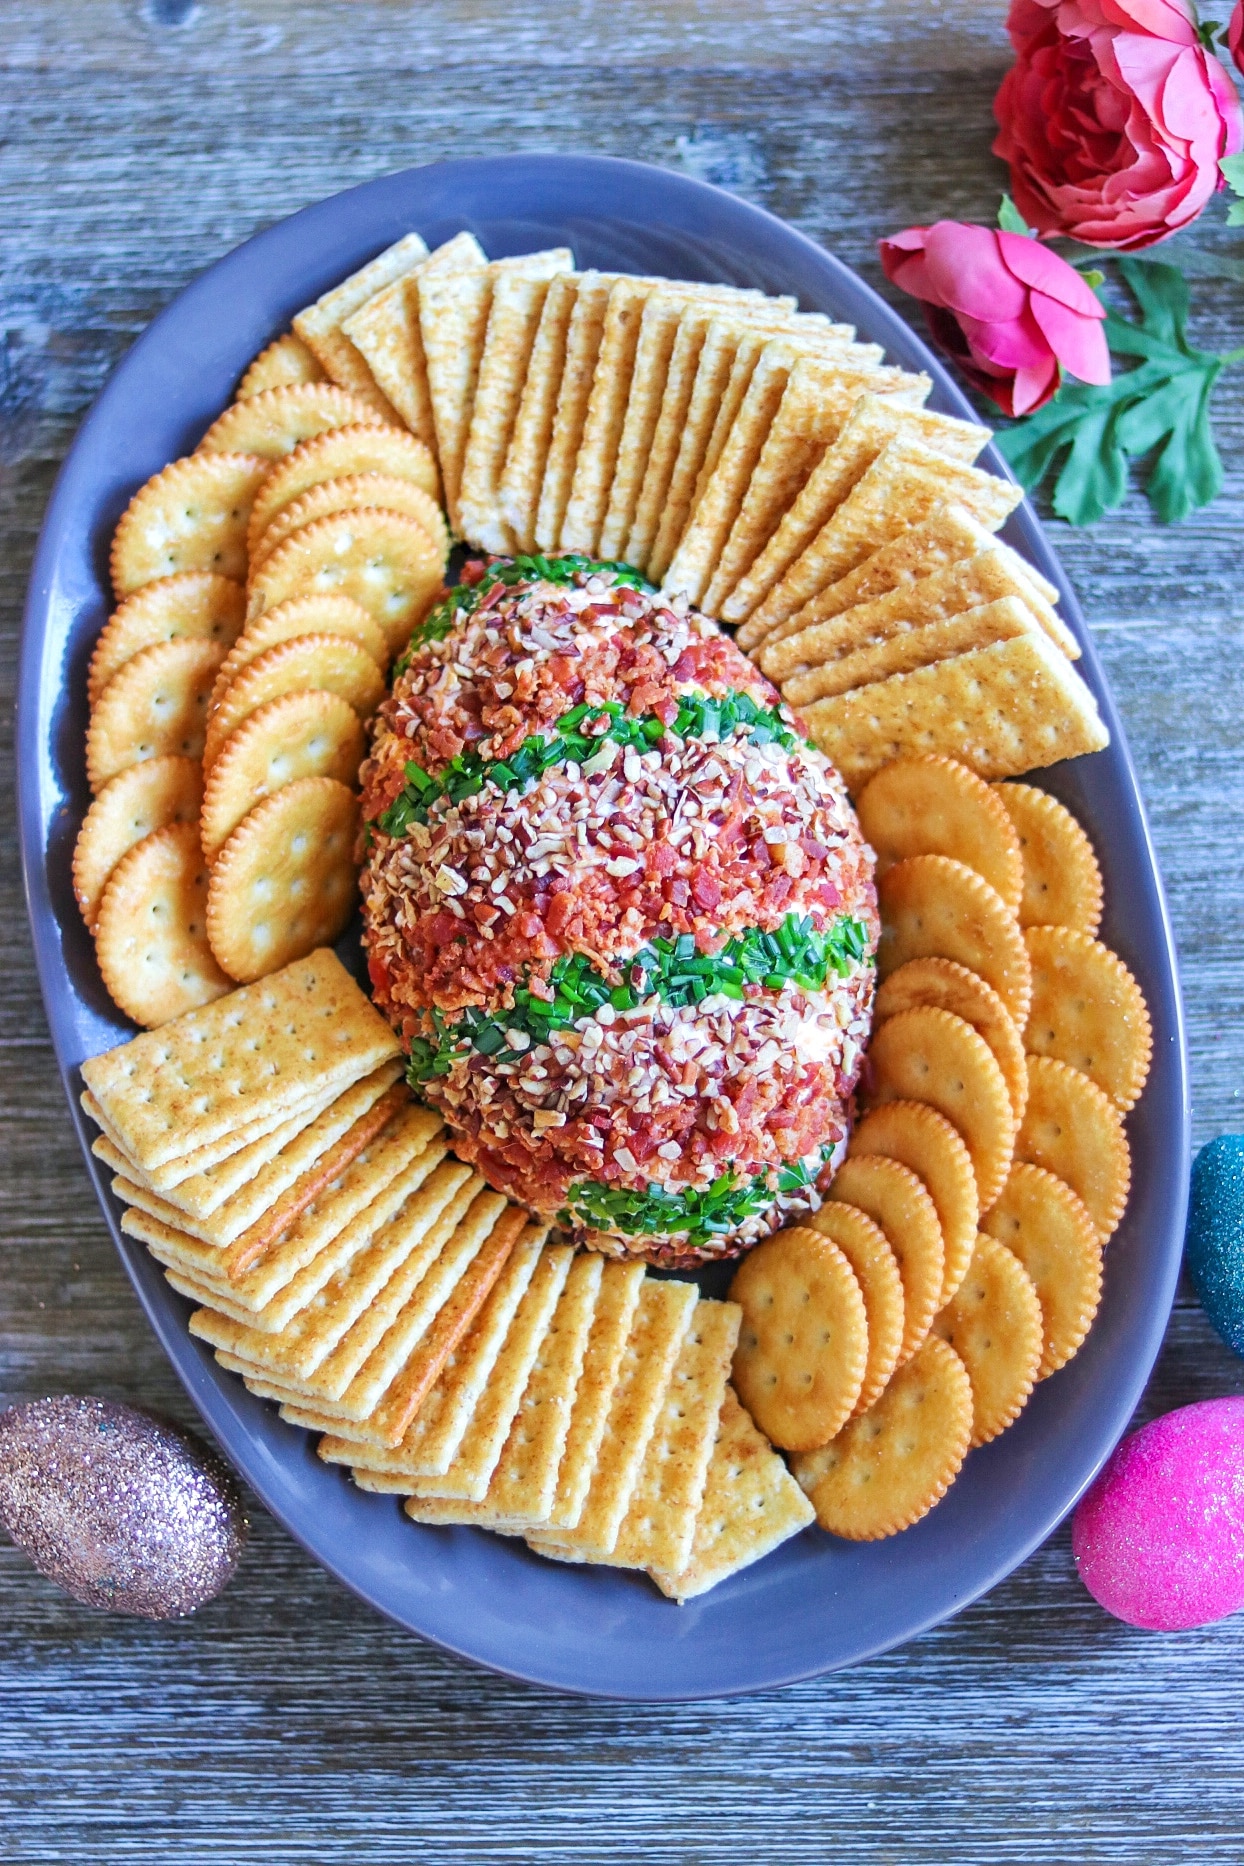 How to make an Easter Egg cheese ball (delicious recipe for creative Easter appetizers)